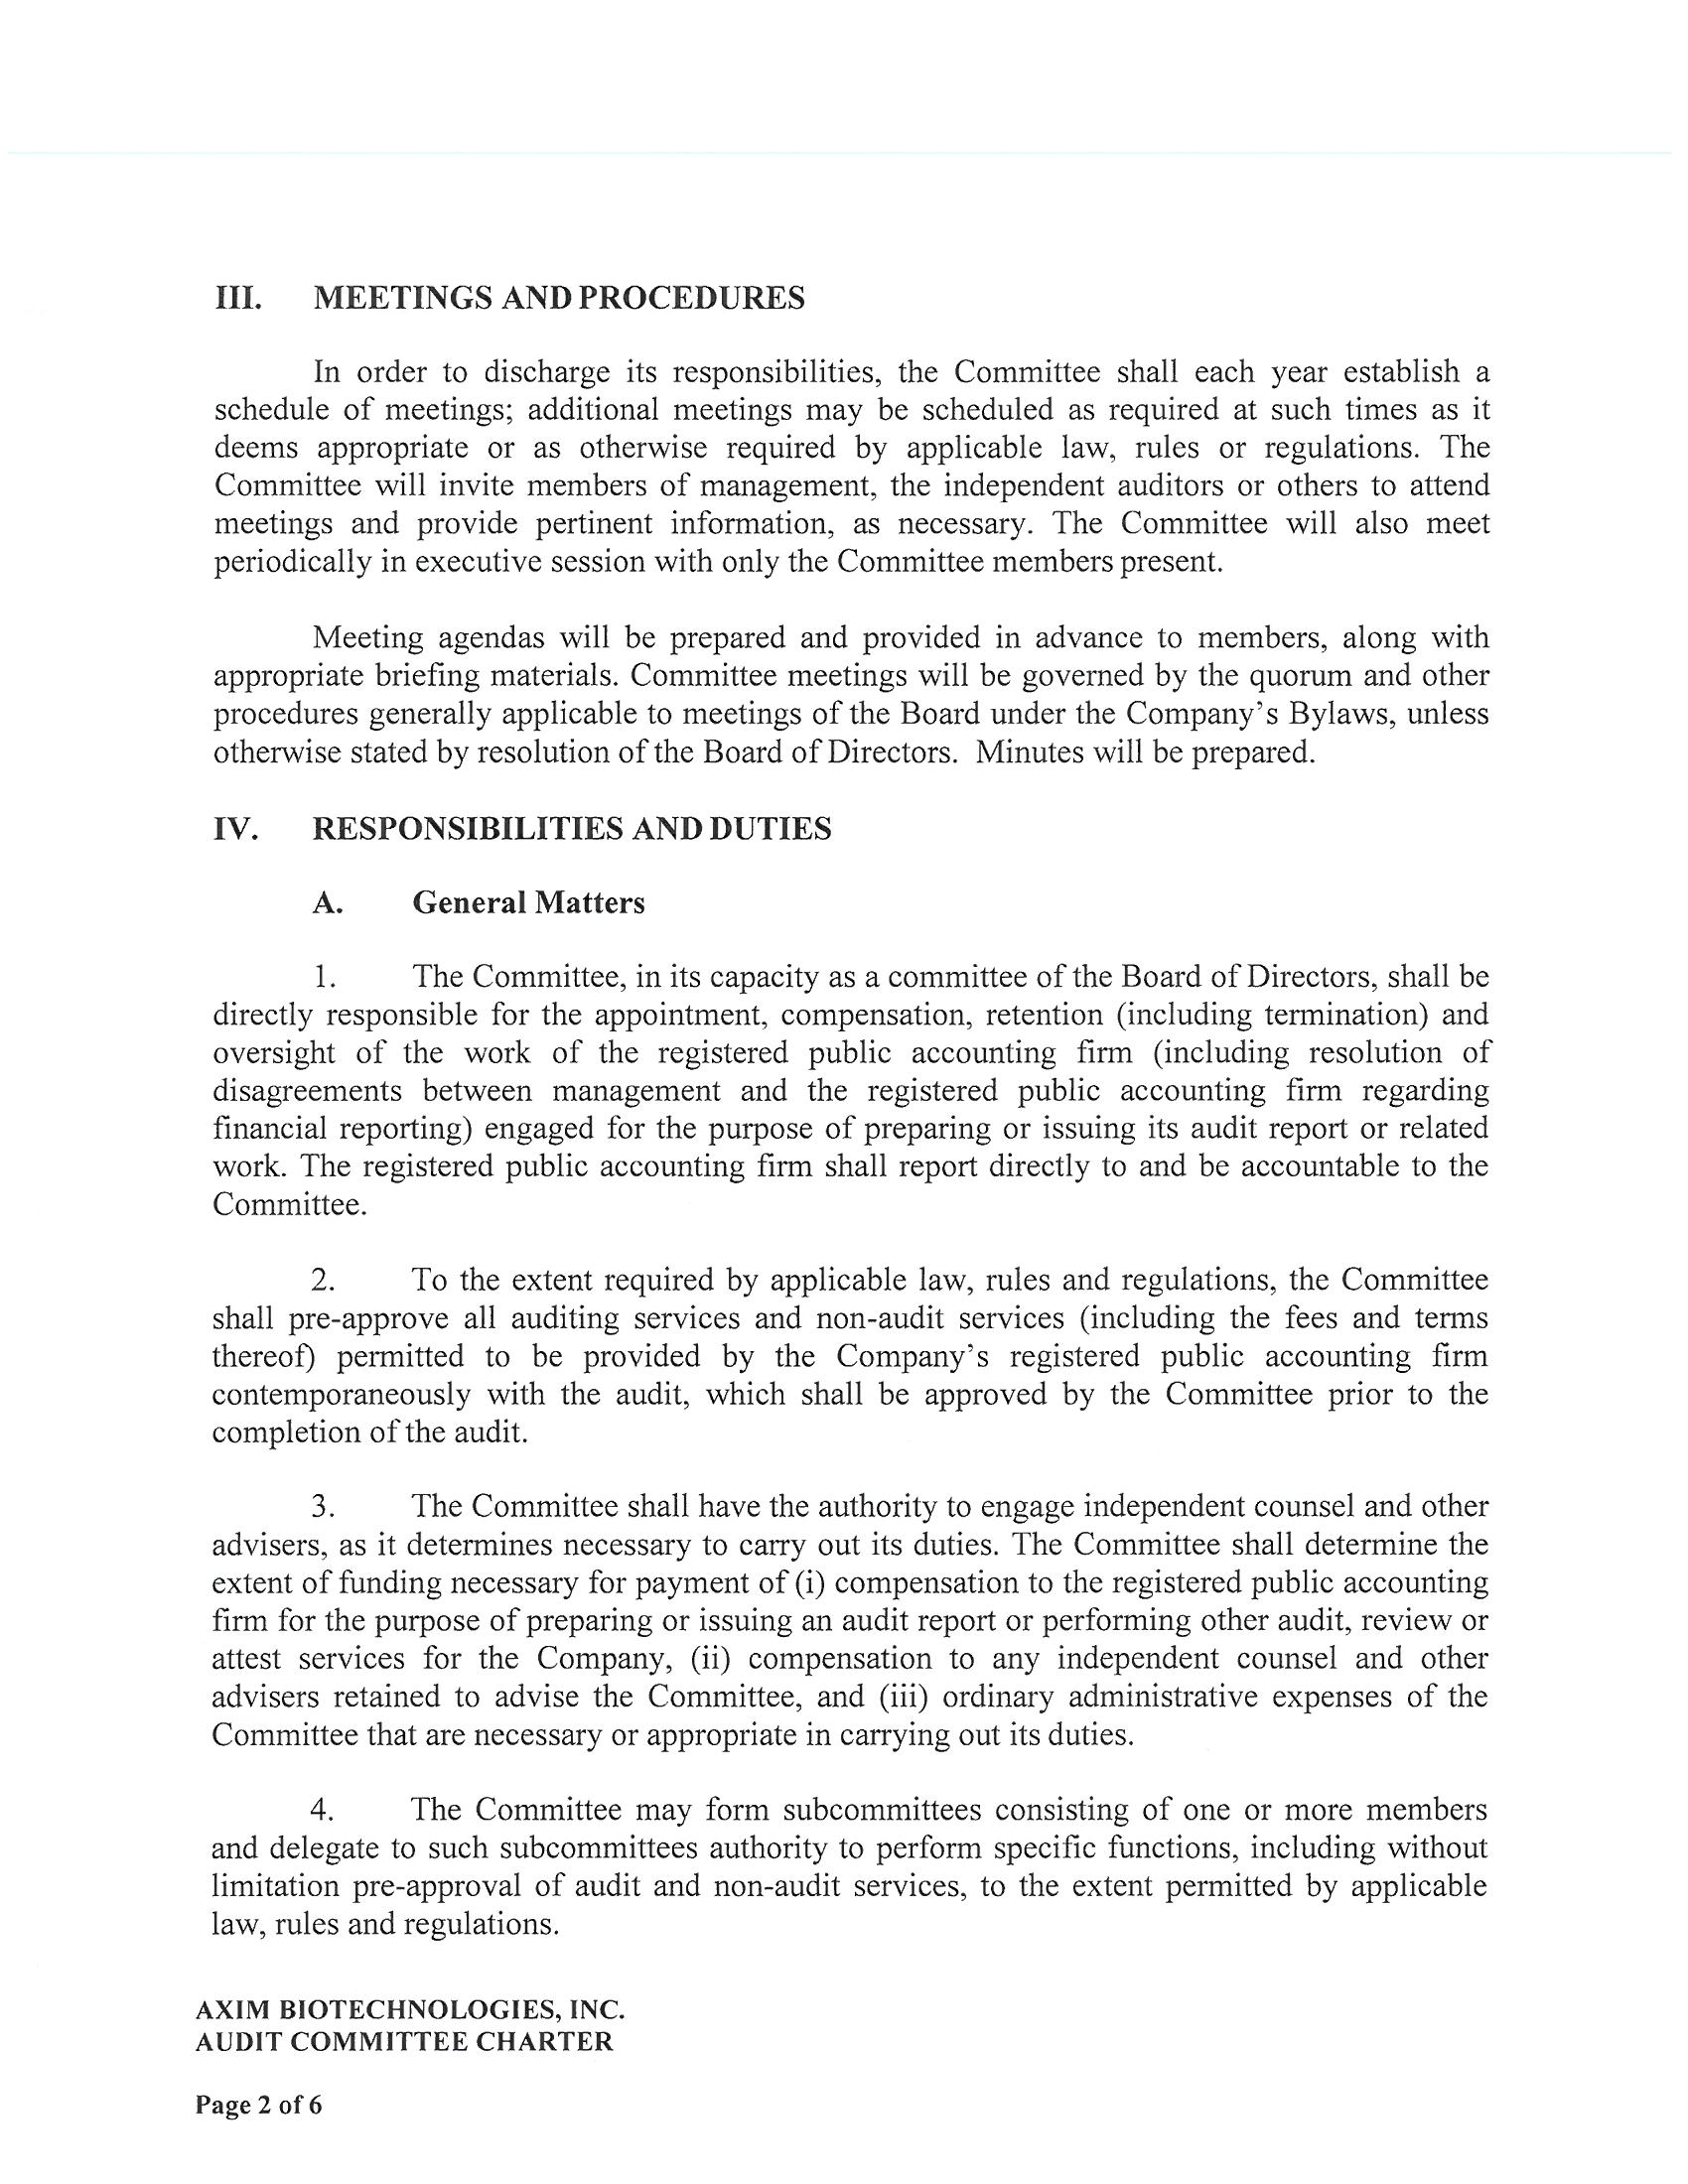 99.3 Audit Committee Charter_Page_2.jpg